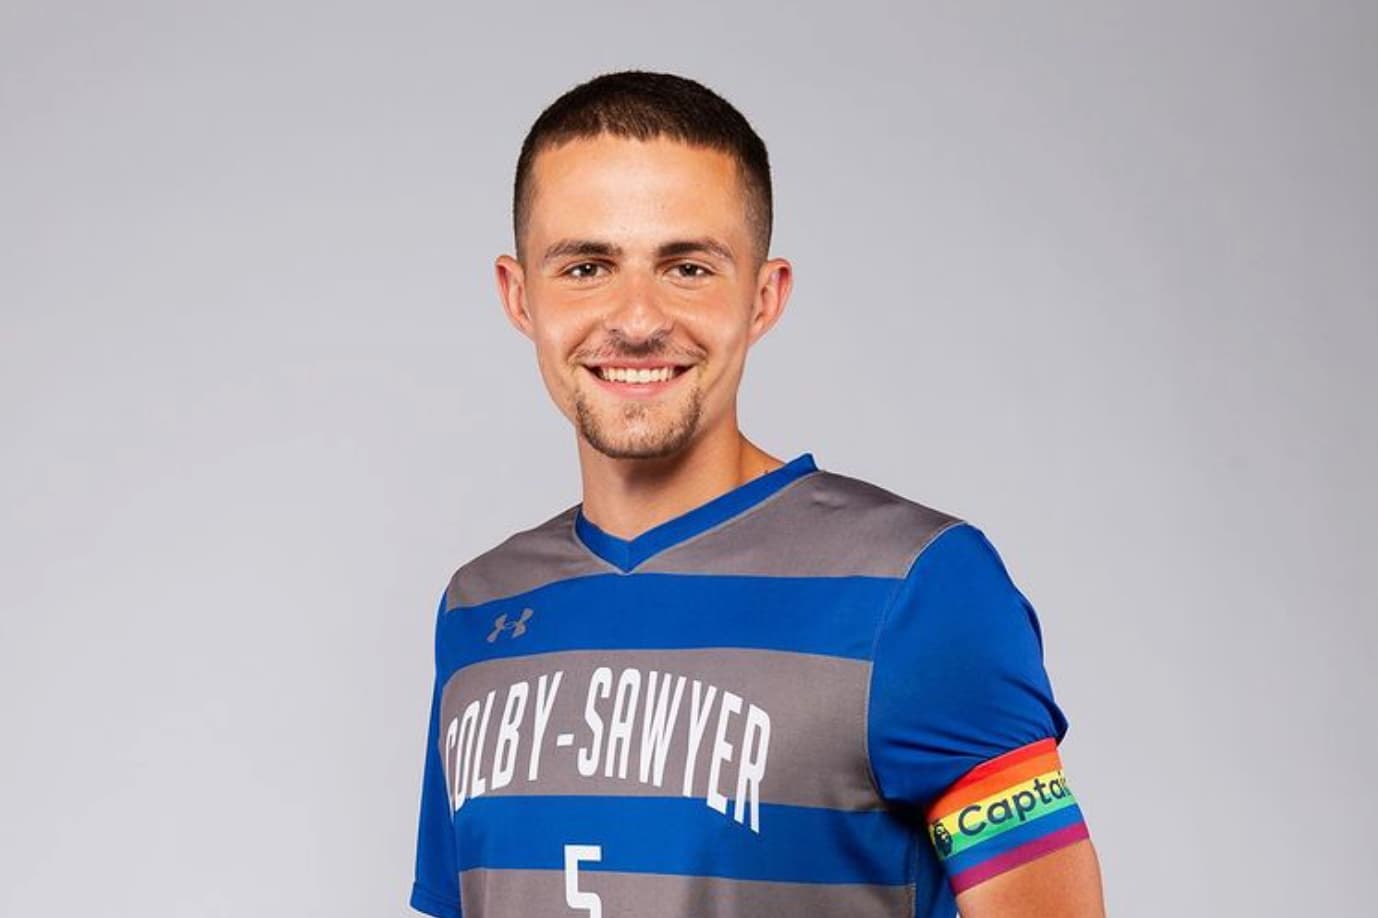 Gay soccer player's team responds to homophobic slur by trouncing opponents